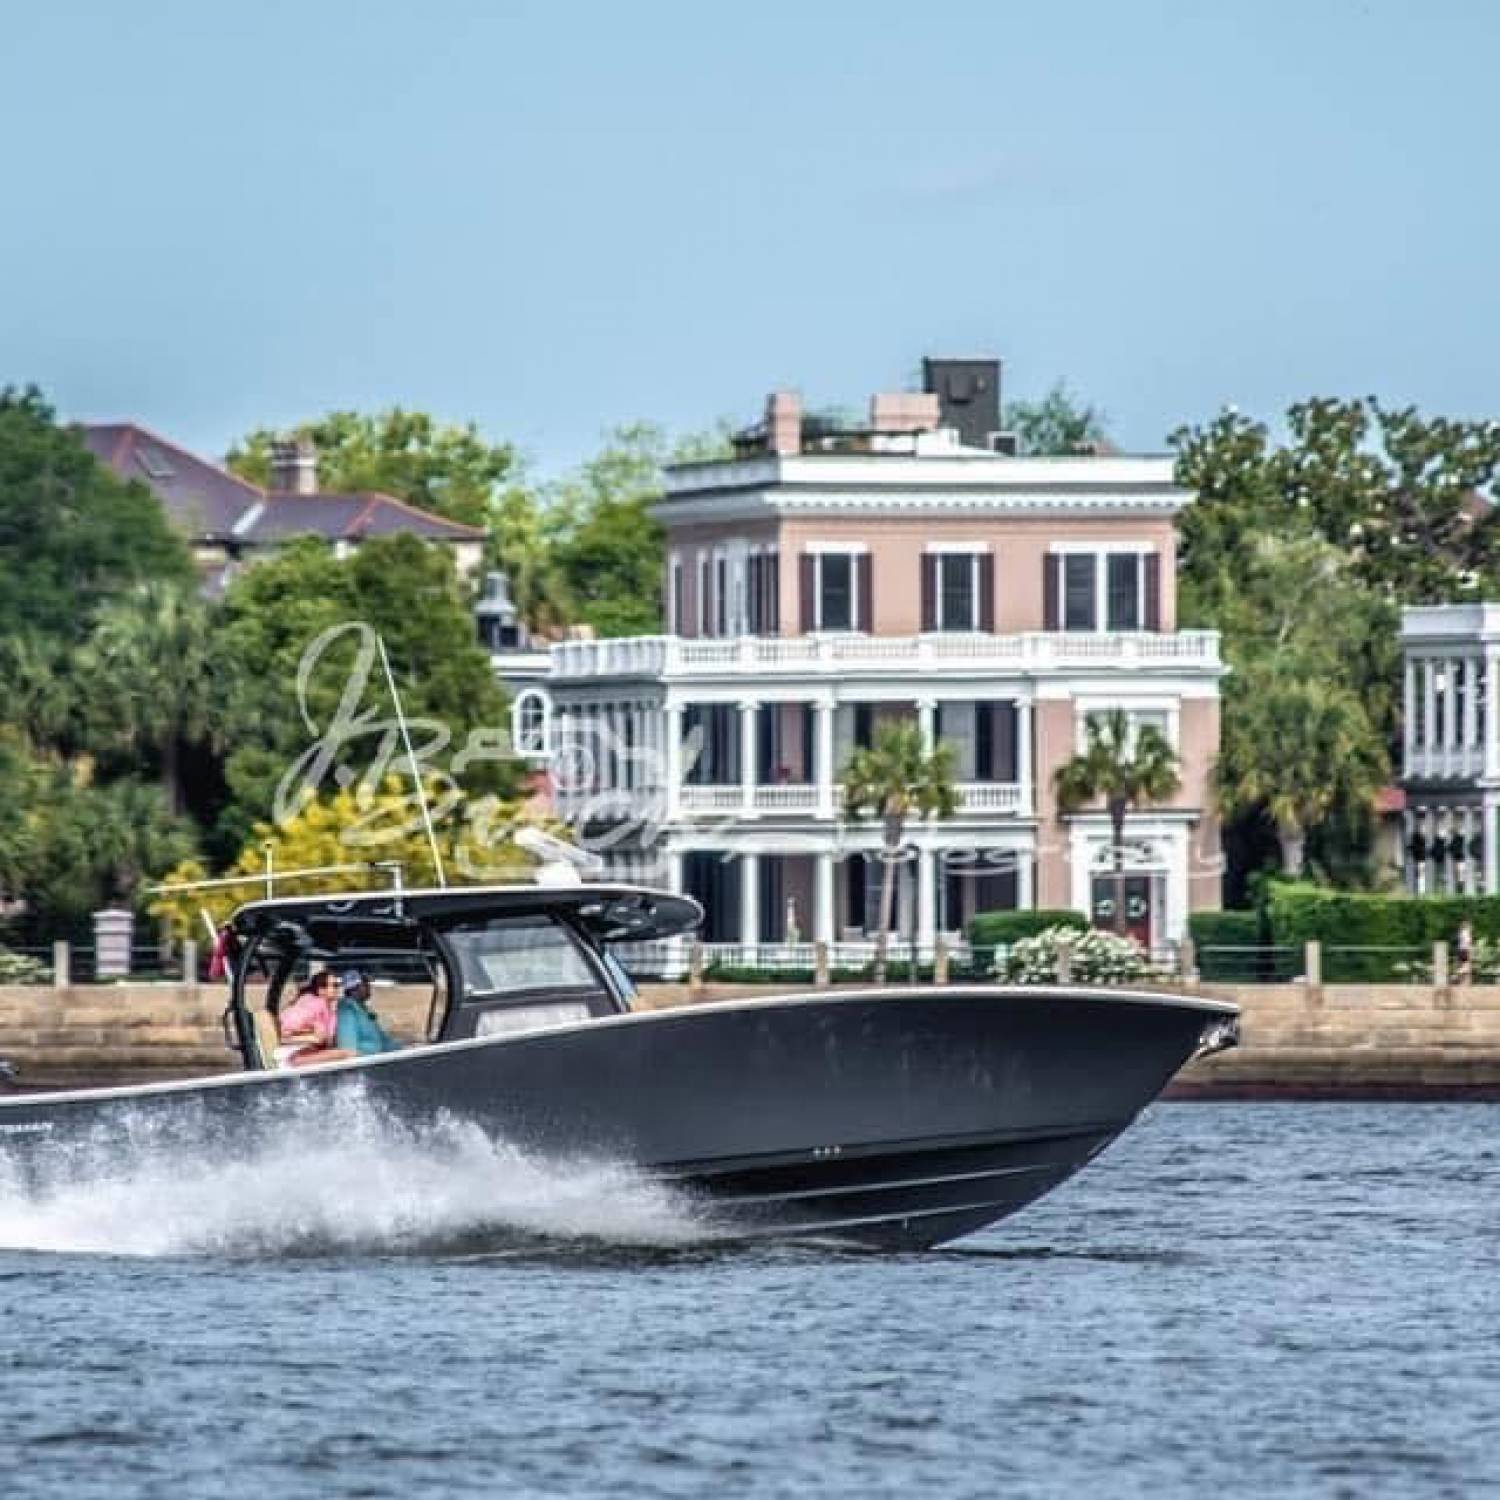 Title: Boating by the Charleston Battery - On board their Sportsman Open 352 Center Console - Location: Charleston Battery. Participating in the Photo Contest #SportsmanJune2023